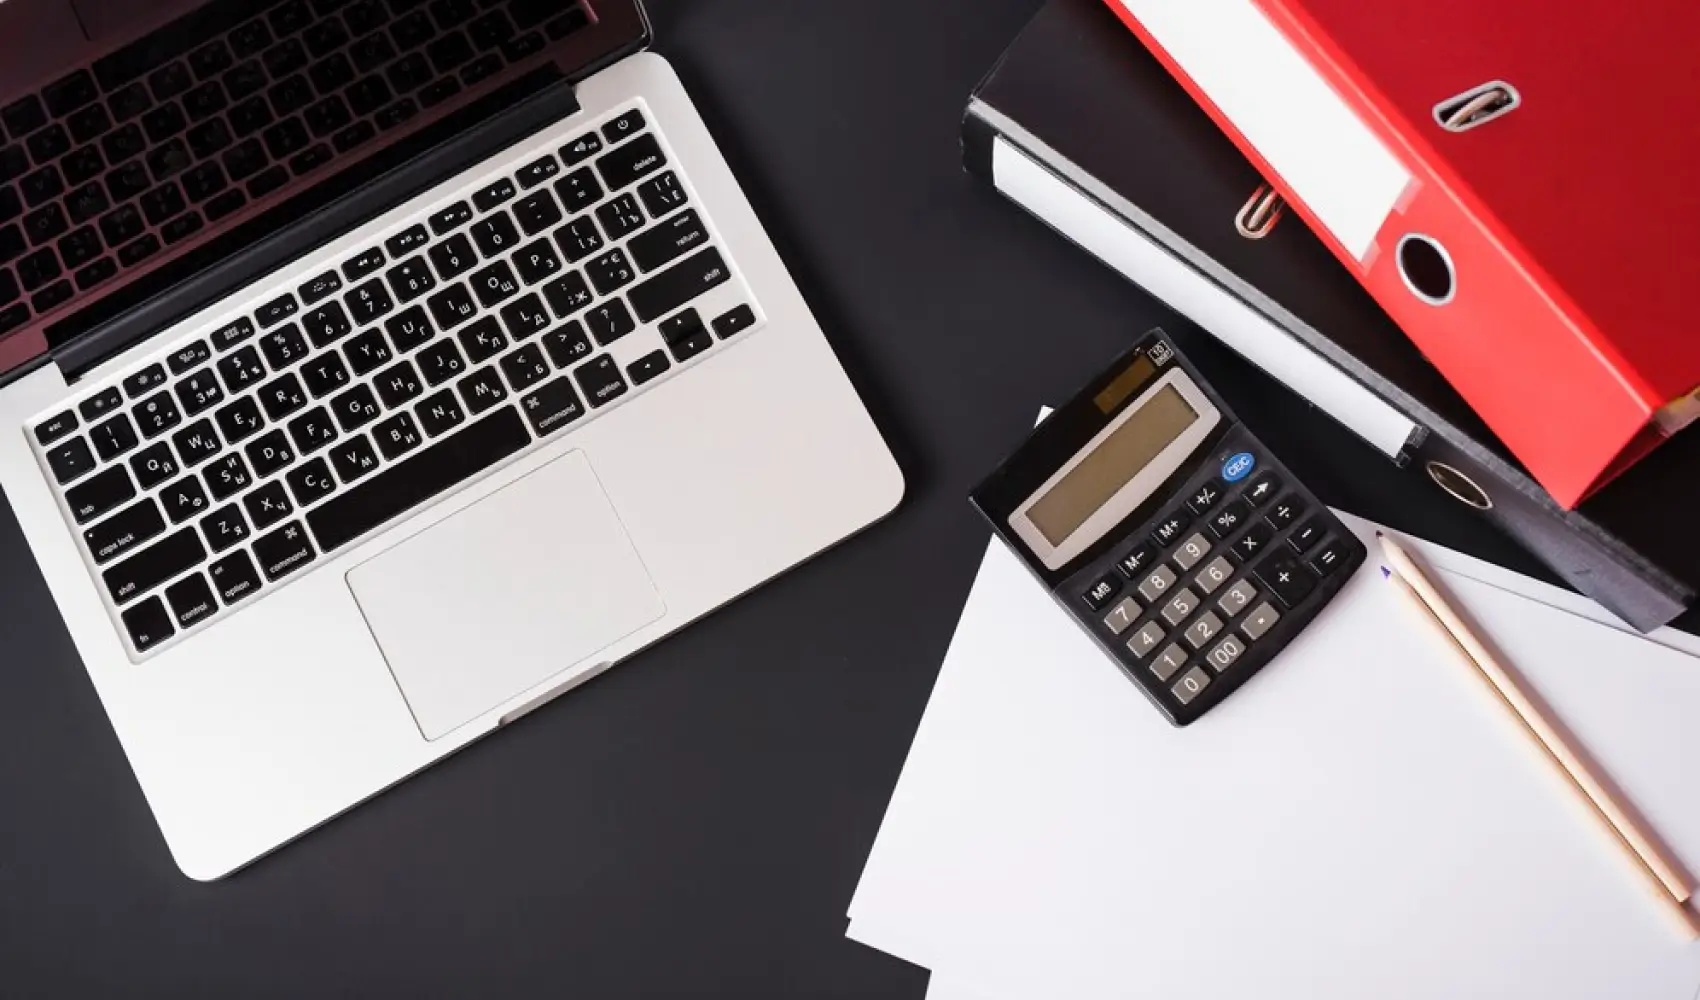 QuickBooks: The Go-To Software For Small Business Finances